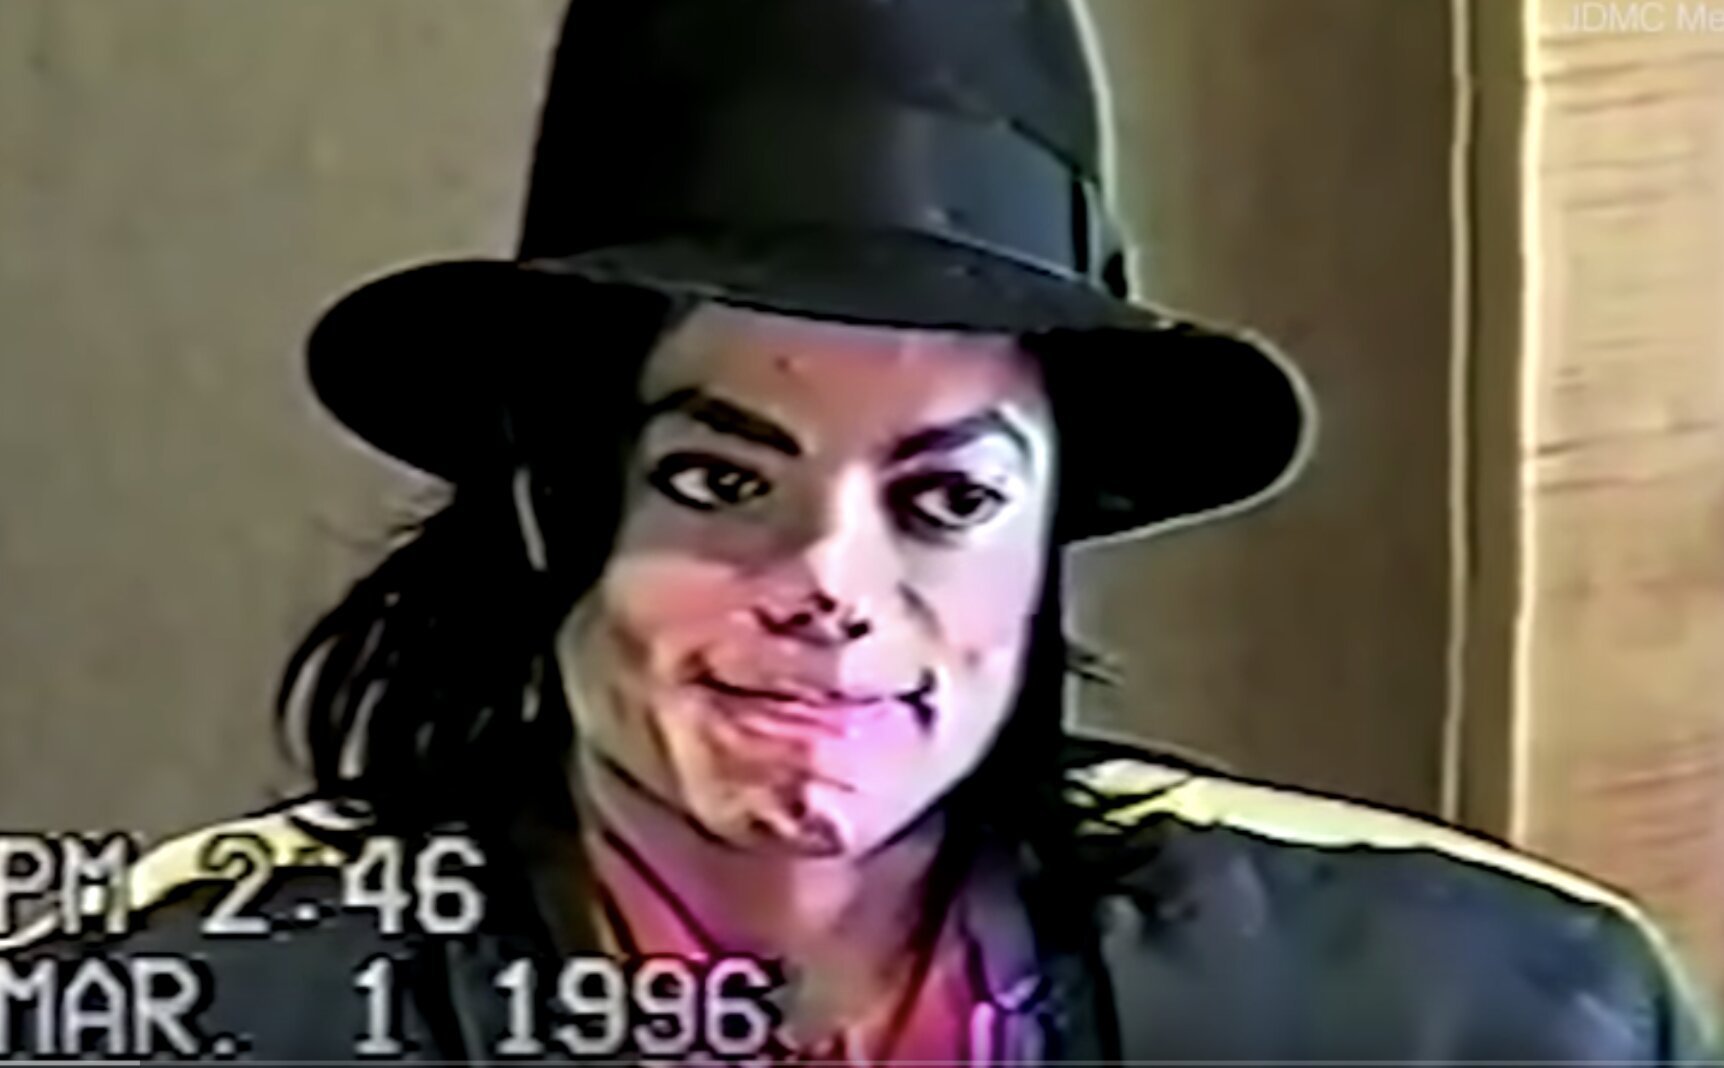 NEW VIDEO! Michael Jackson was asked on camera whether he’s a pedophile. Quotes scripture AGAINST pedophilia!